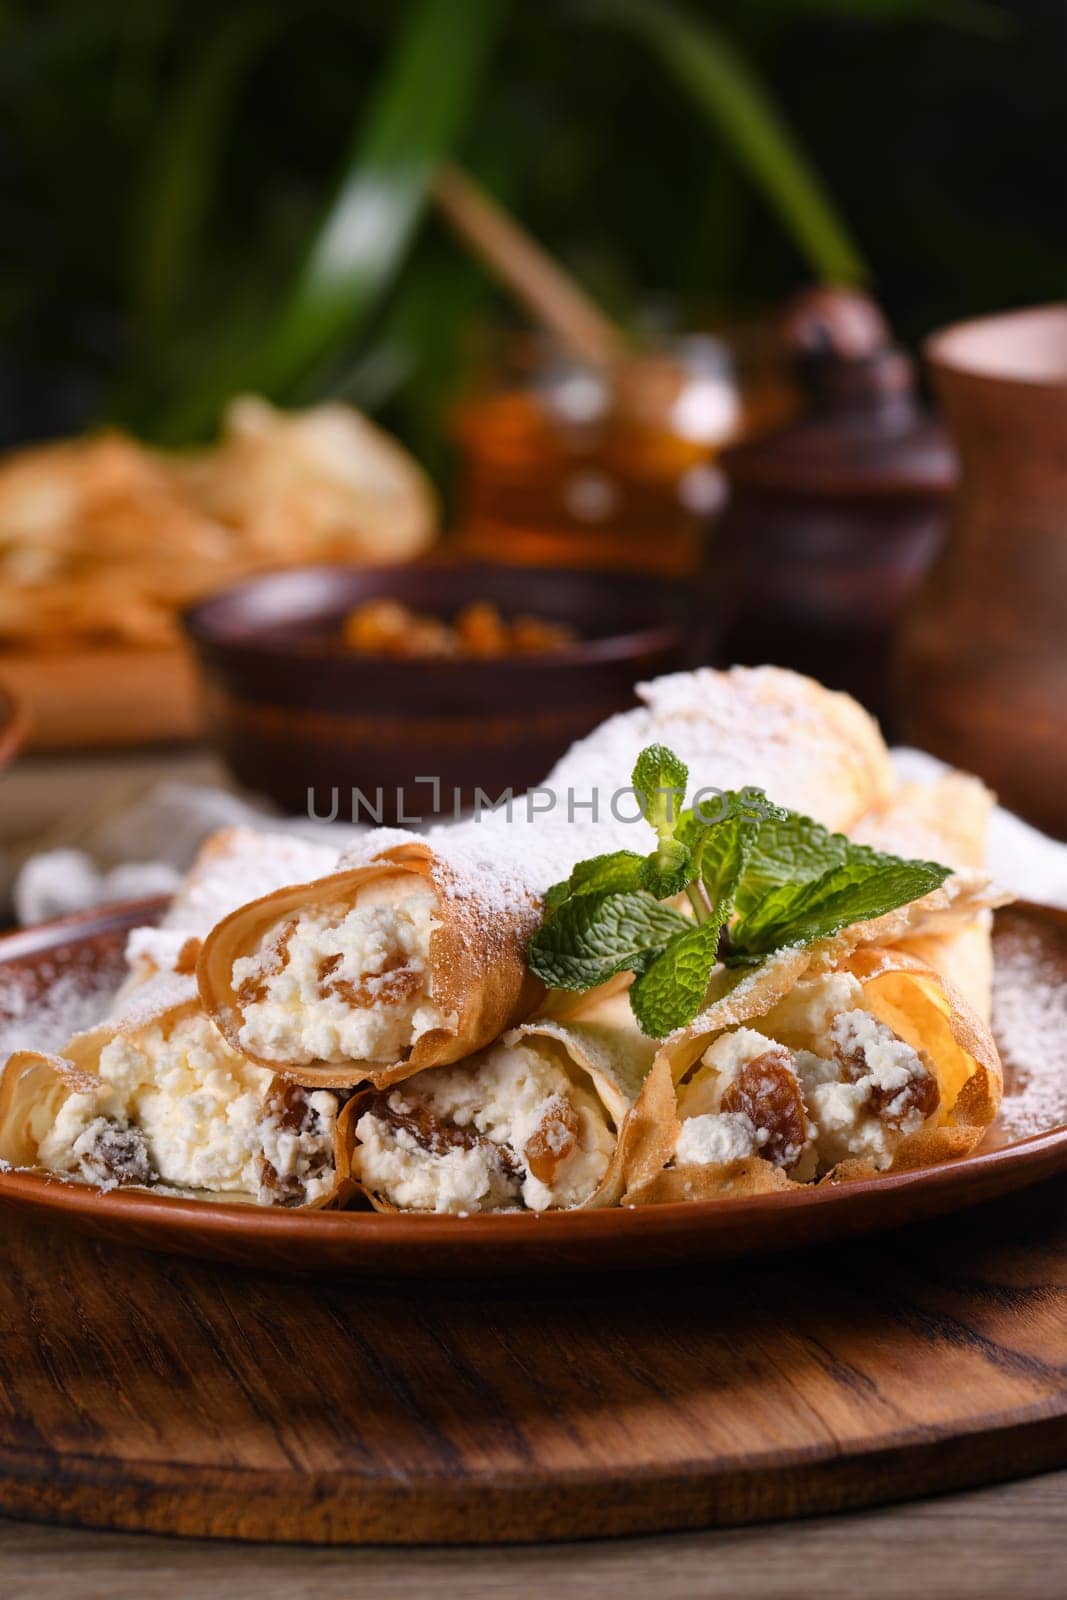 Thin pancakes stuffed with cottage cheese, honey and raisins by Apolonia